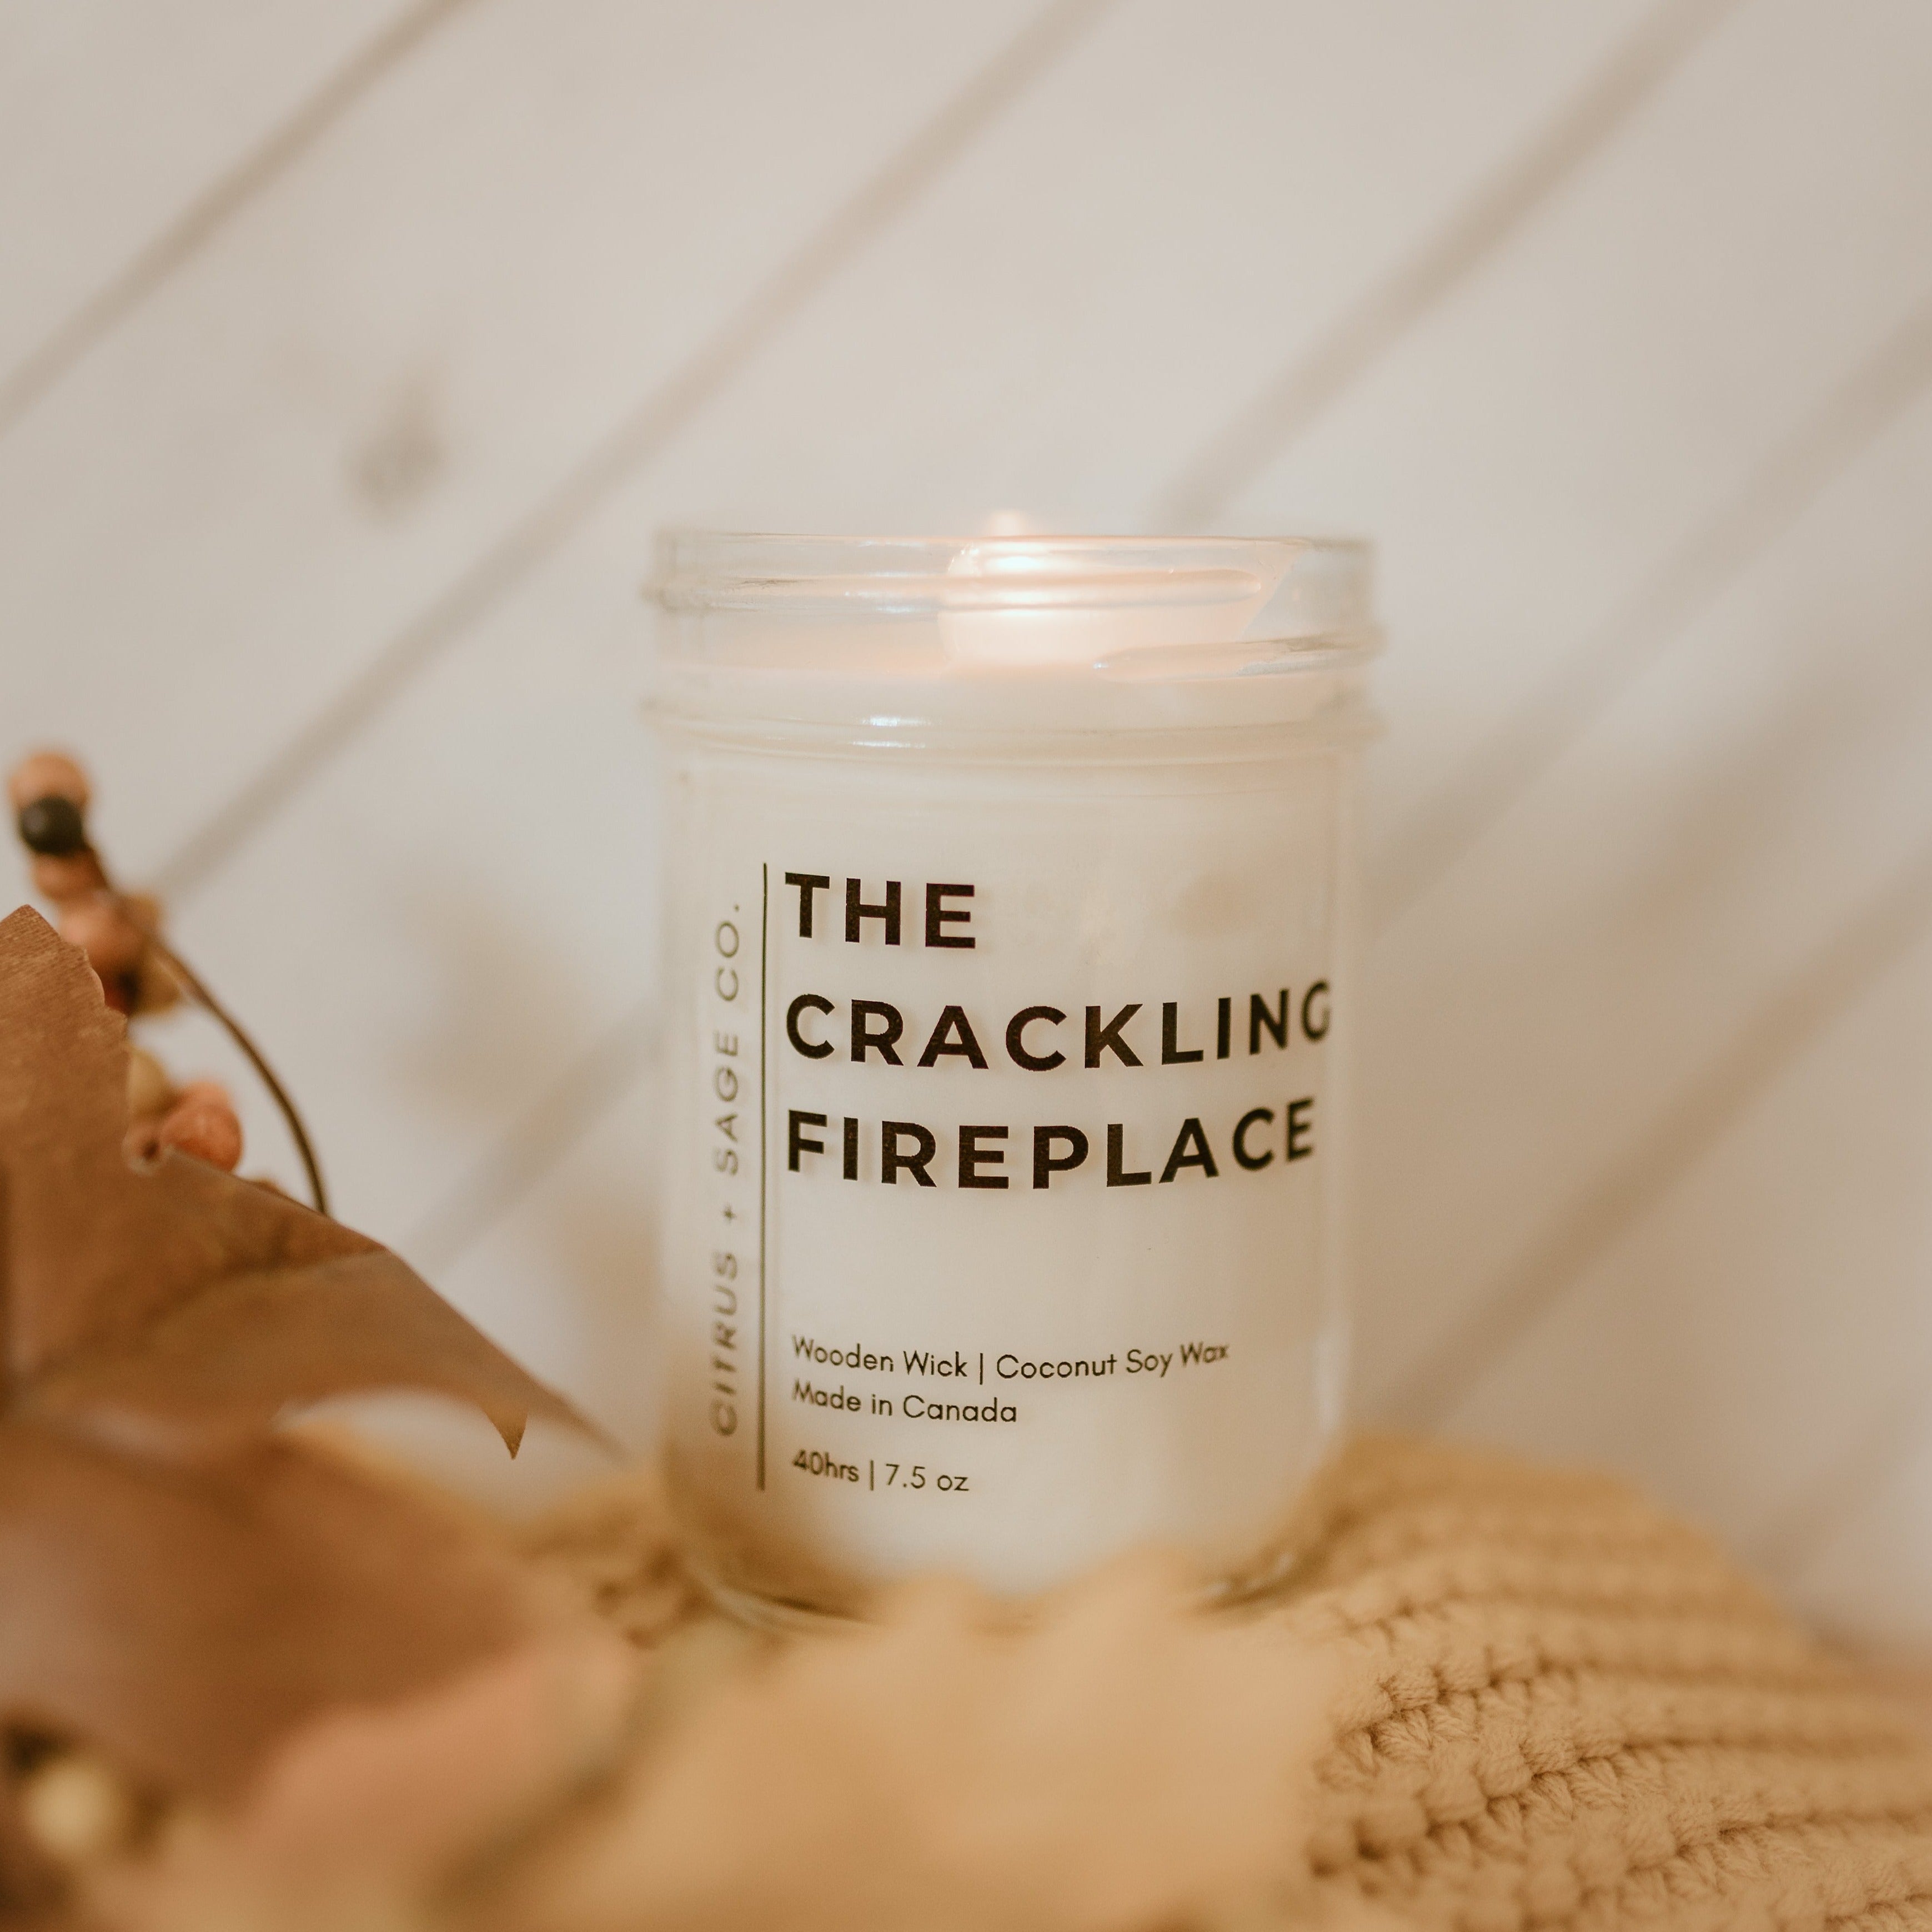 The Crackling Fireplace.